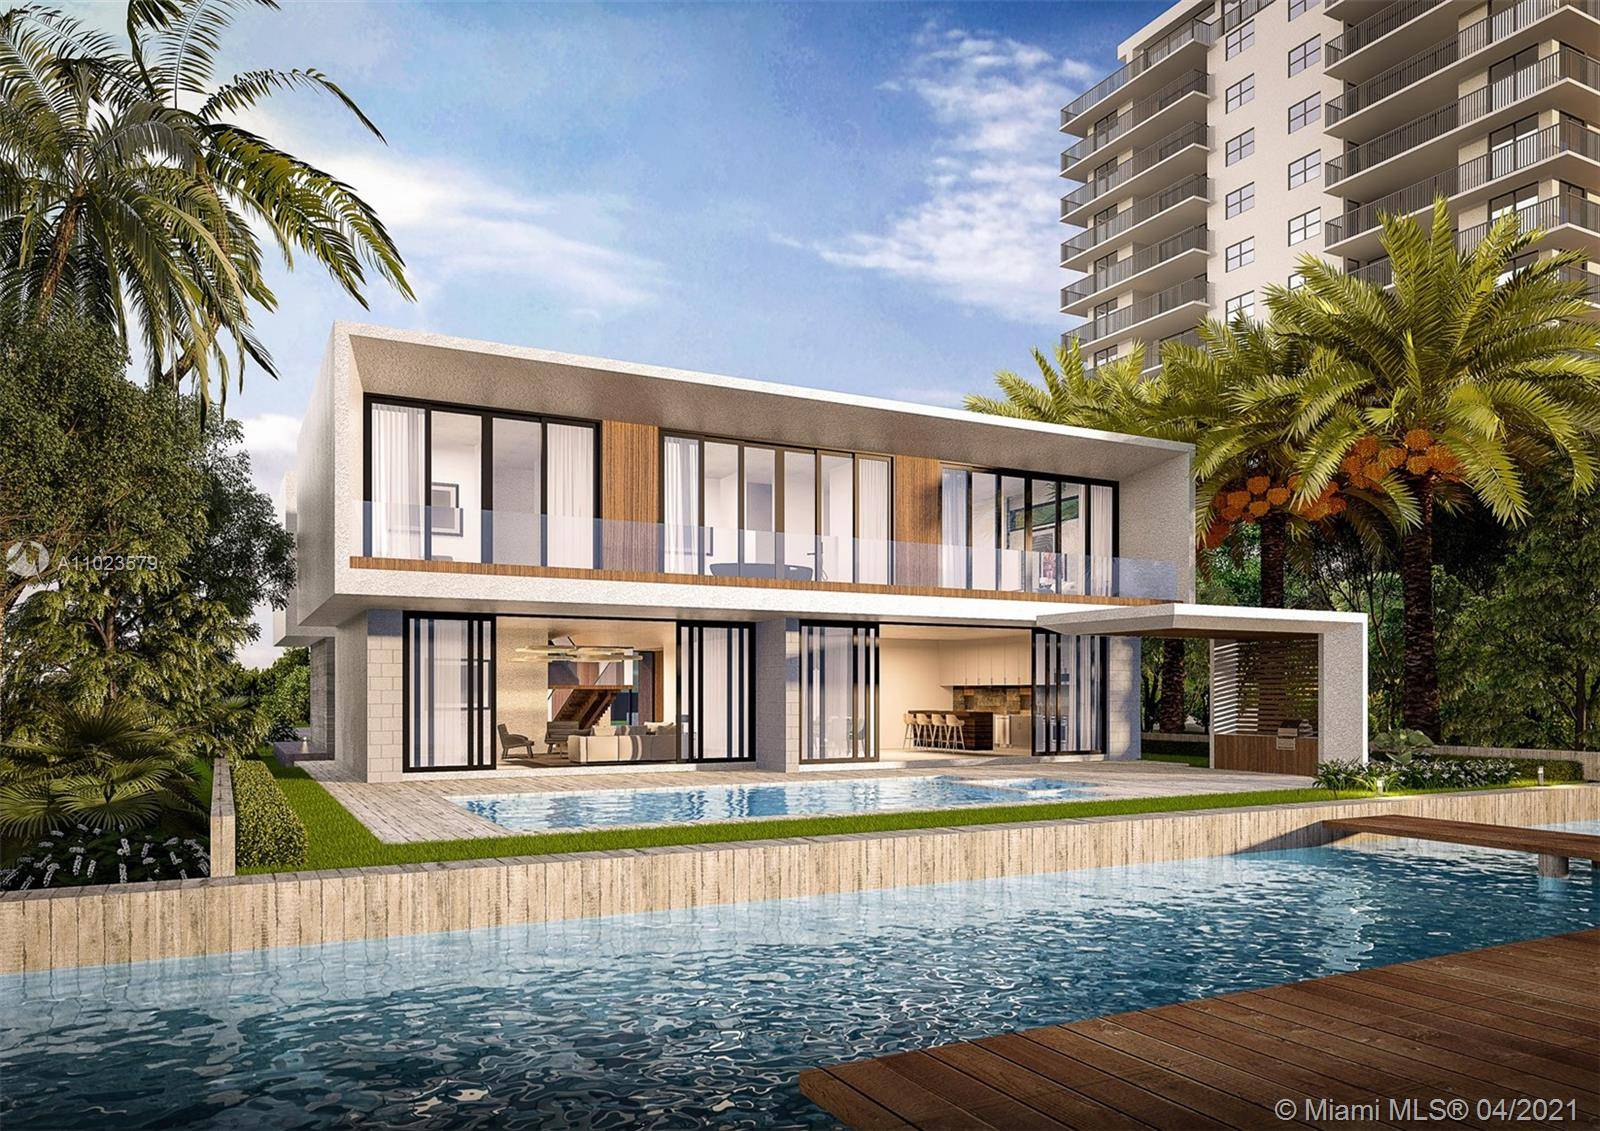 Venetian Islands brand new waterfront with striking contemporary architecture offering 75 feet of wide bayfront and stunning water and Miami Skyline views !